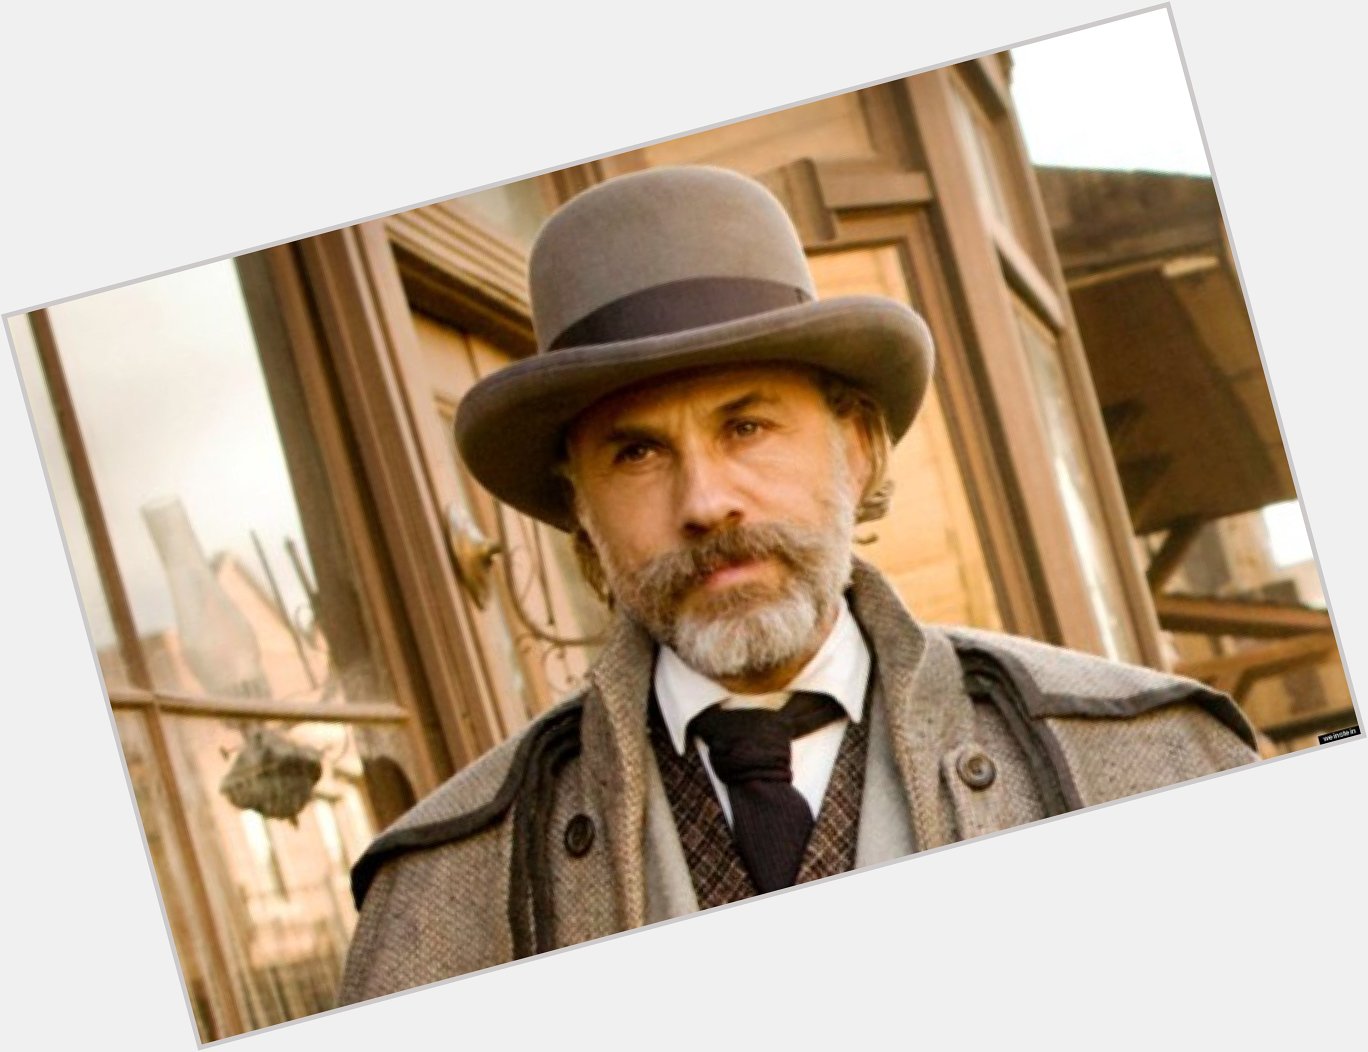 Happy birthday to a terrific, scene-stealing character actor, two-time Oscar winner Christoph Waltz! 